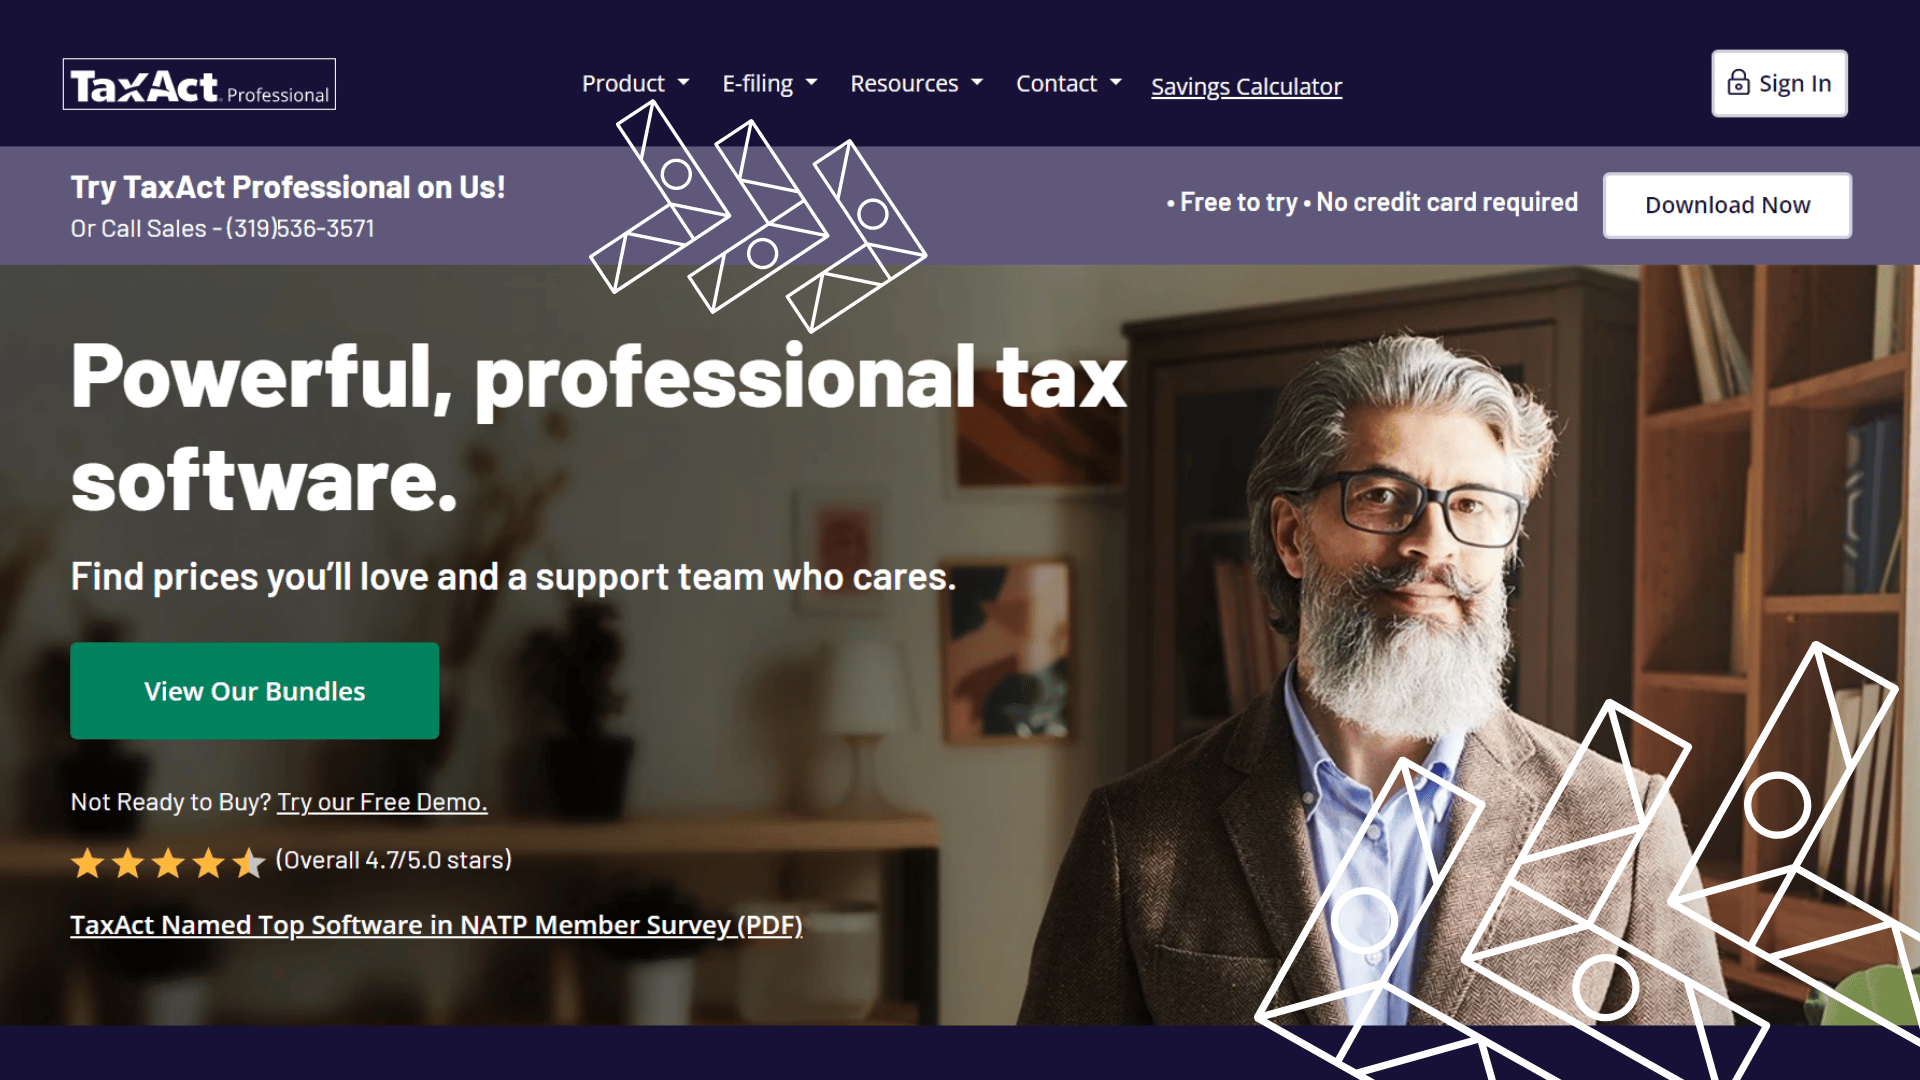 TaxAct Professional Features